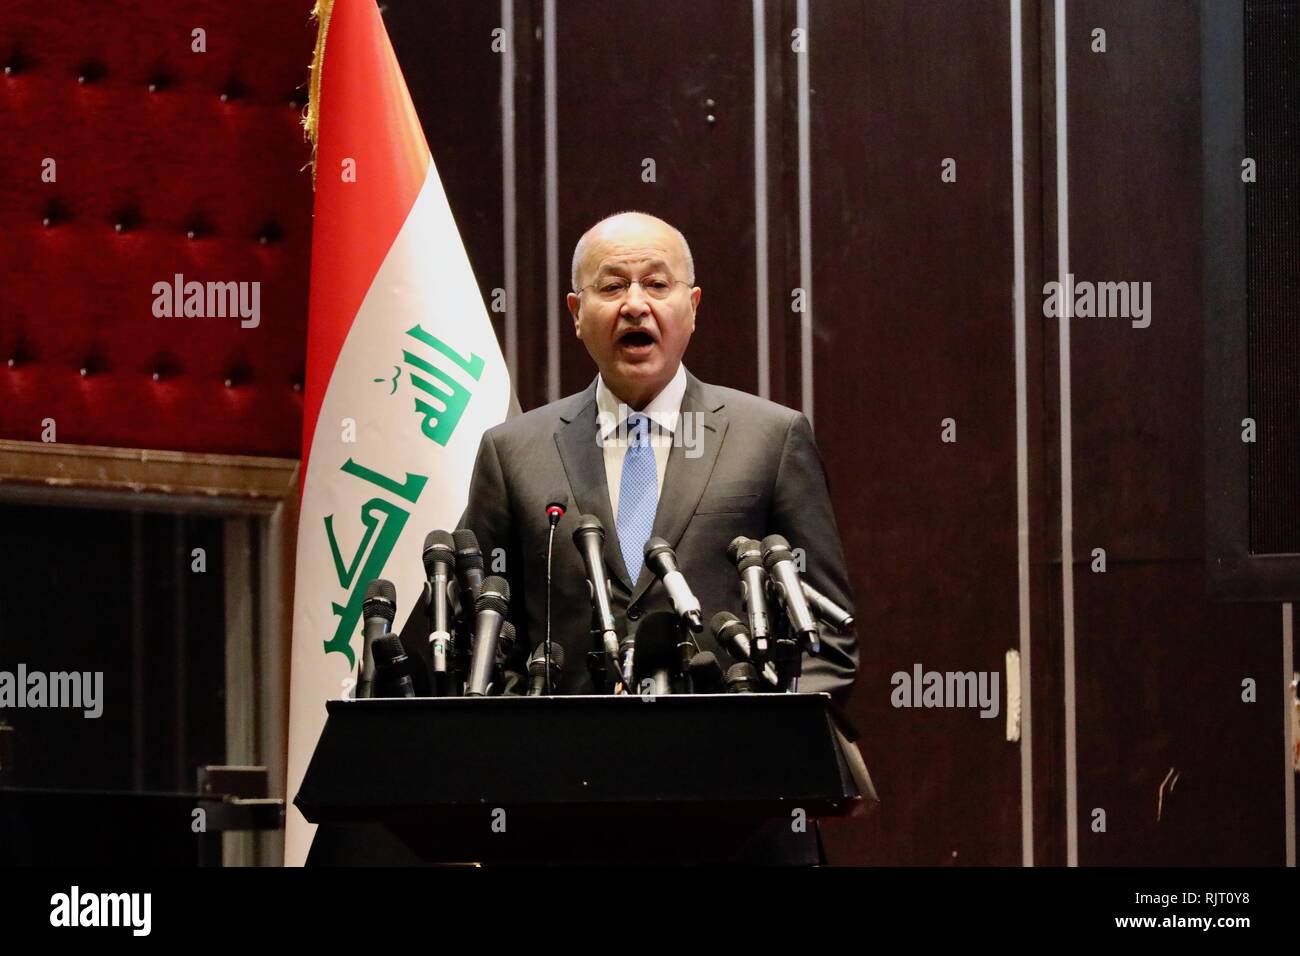 Baghdad, Iraq. 7th Feb, 2019. Iraqi President Barham Salih speaks at the opening ceremony of the Baghdad International Book Fair 2019, in Baghdad, Iraq, Feb. 7, 2019. The fair kicked off Thursday with the participation of hundreds of publishers and high attendance of readers, as it sheds more light on eradicating terror and extremism in the war-torn country. Credit: Khalil Dawood/Xinhua/Alamy Live News Stock Photo